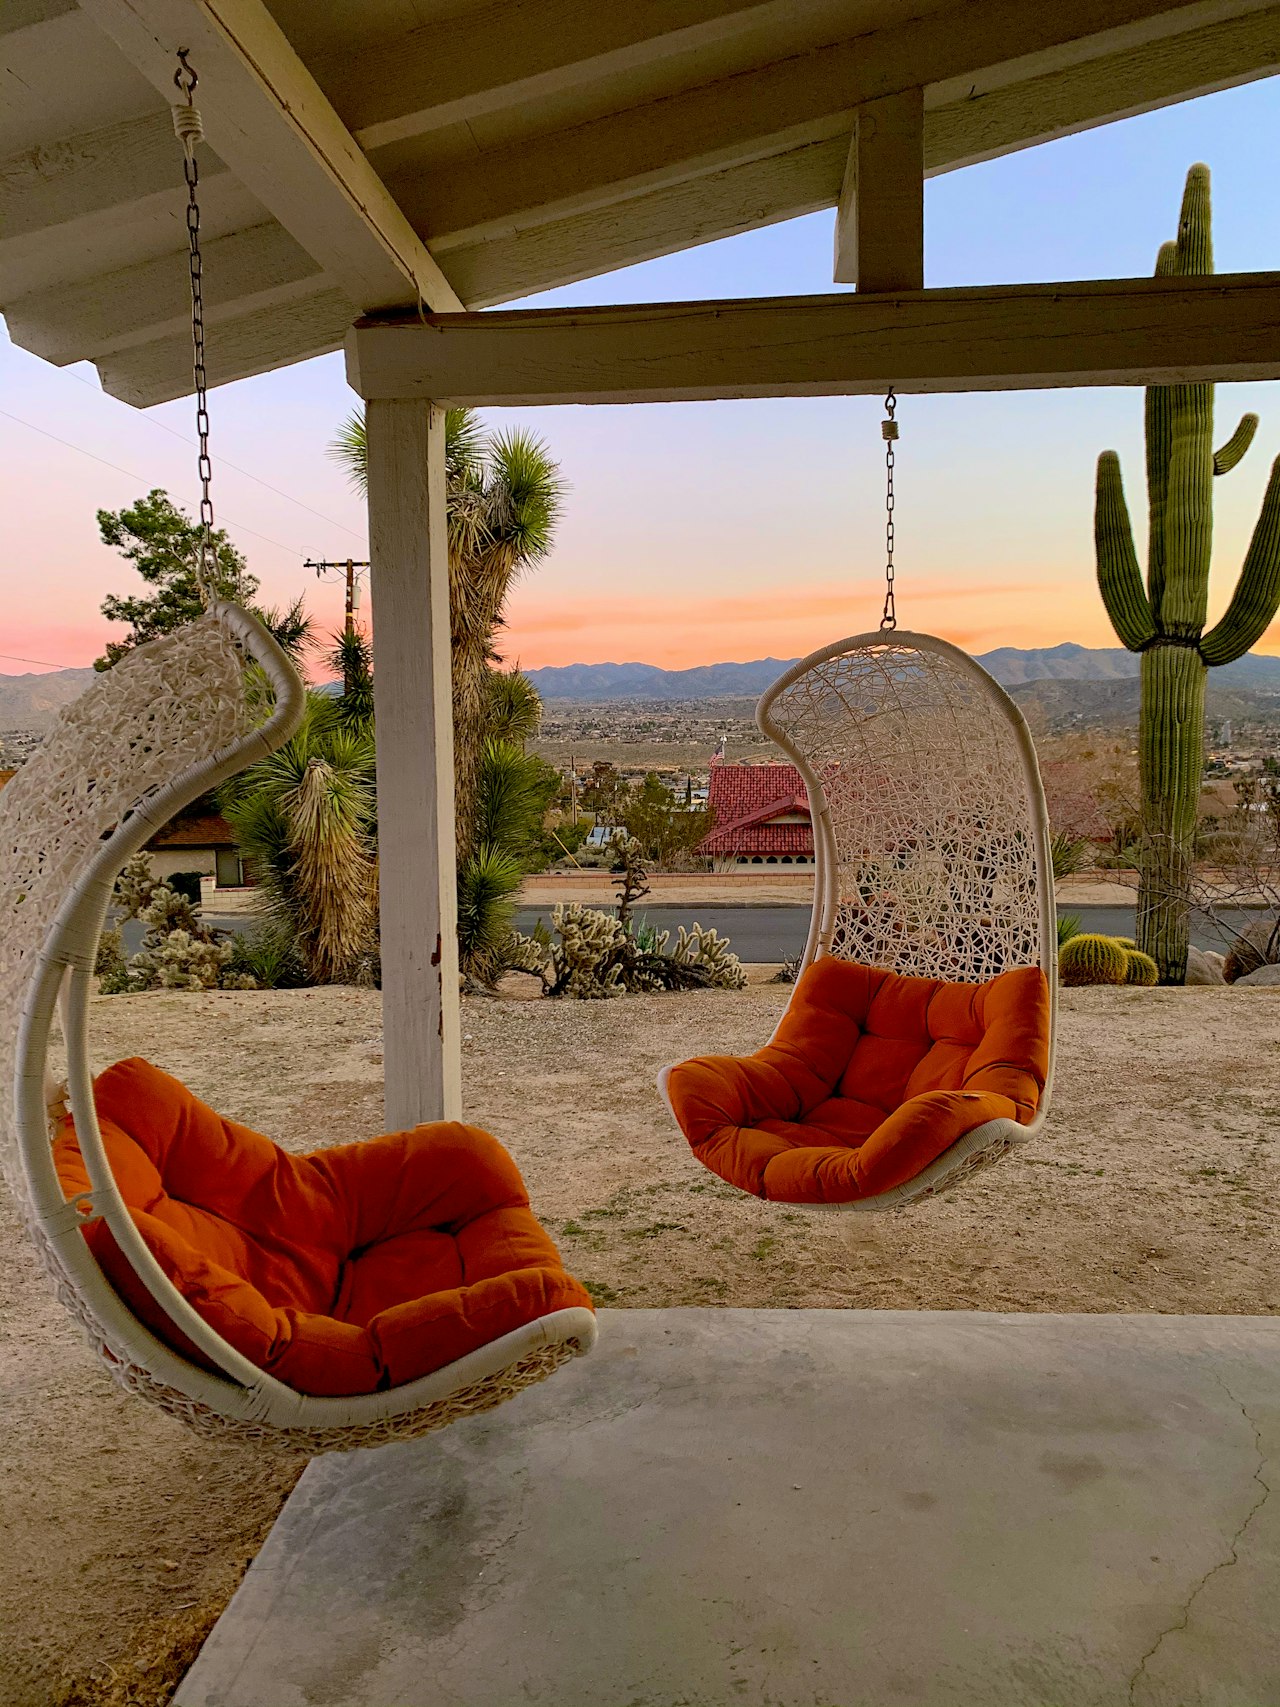 WHERE TO FIND YOUR NEWEST LUXURY OUTDOOR PIECES